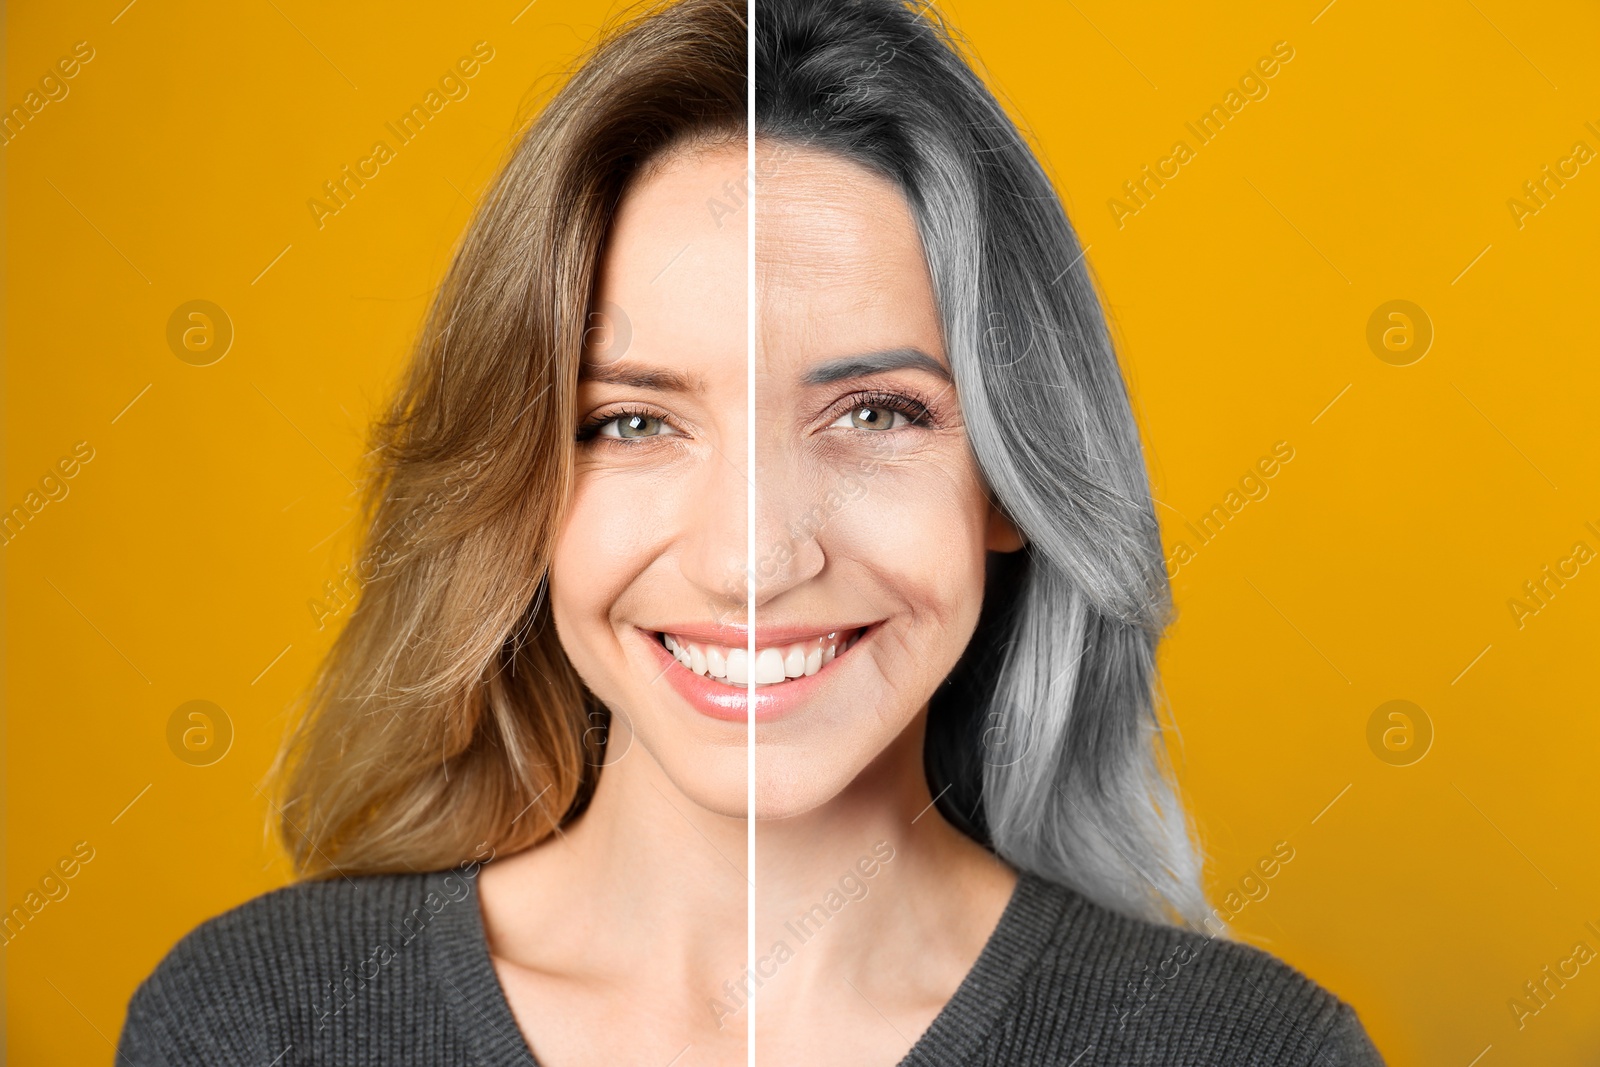 Image of Changes in appearance during aging. Portrait of woman divided in half to show her in younger and older ages. Collage design on orange background